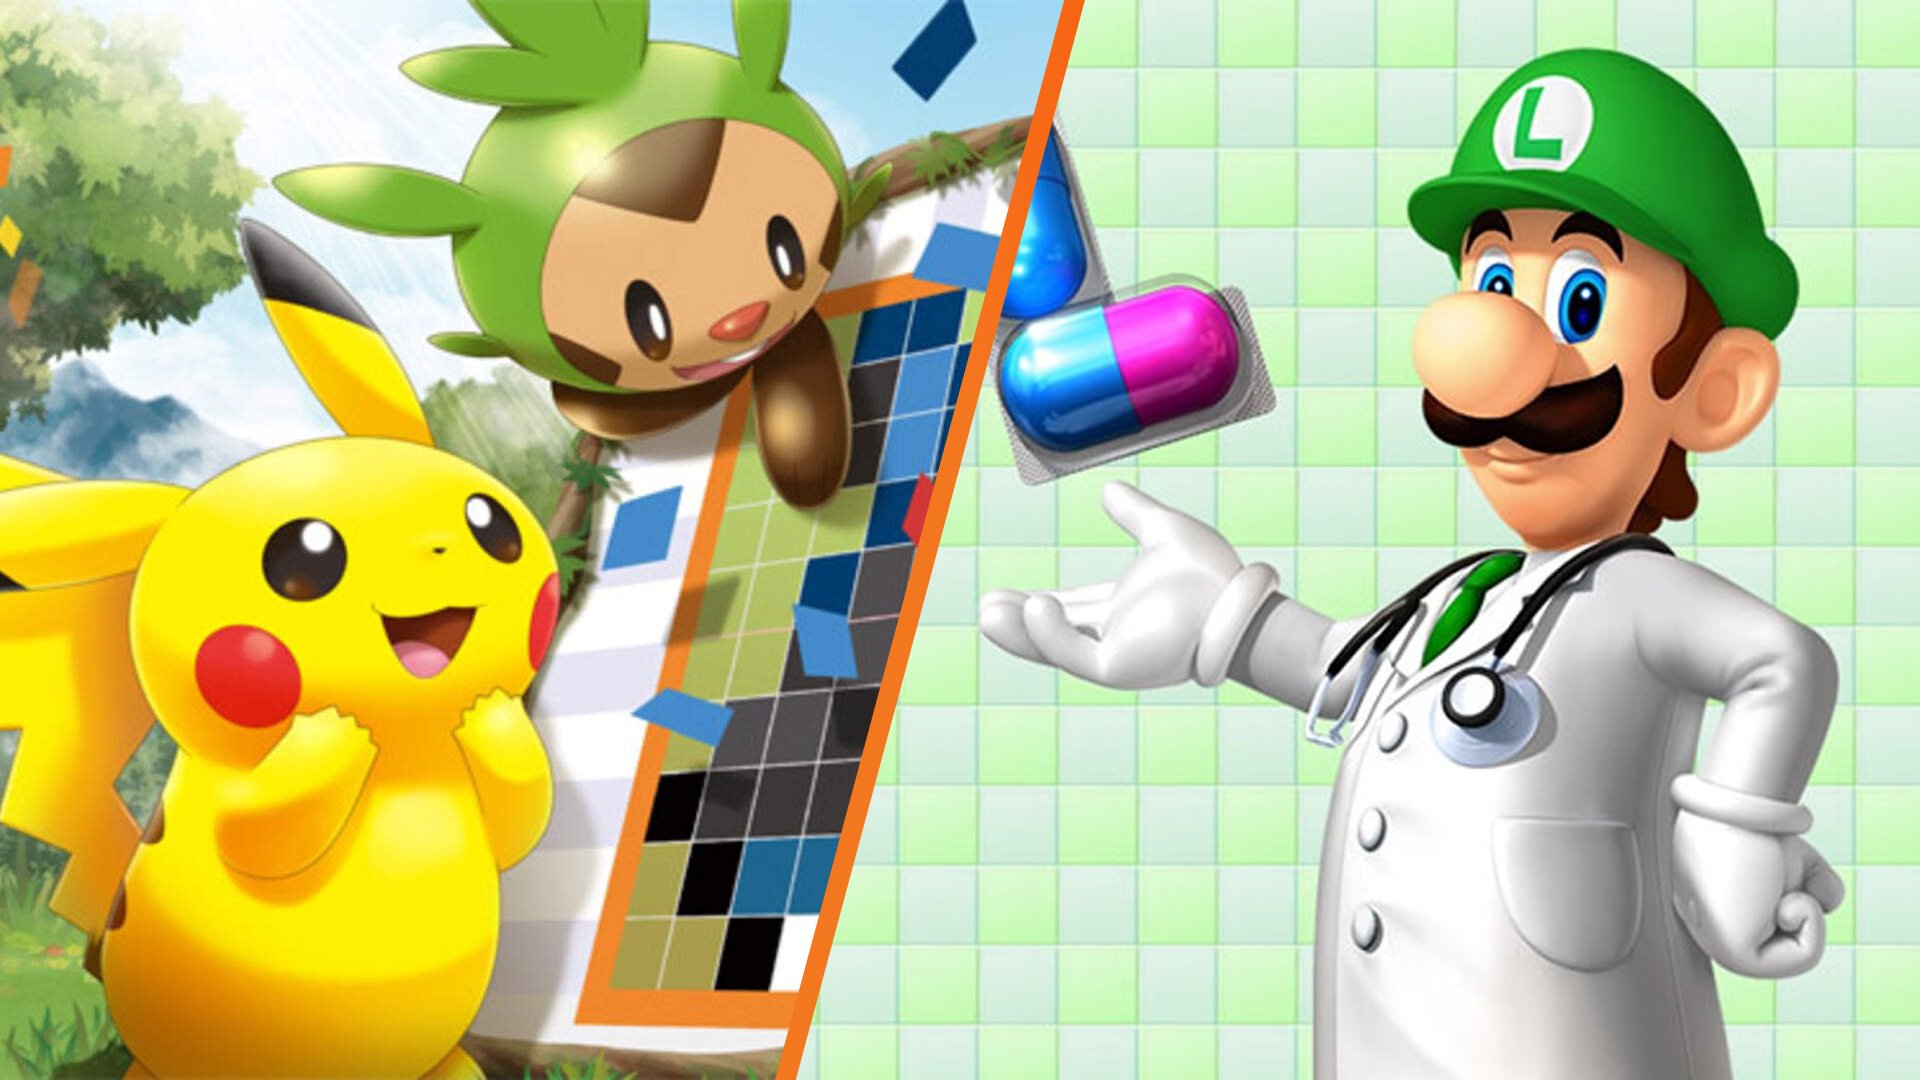 20+ Wii U & 3DS eShop Games You NEED to Buy Before They're Gone Forever! 